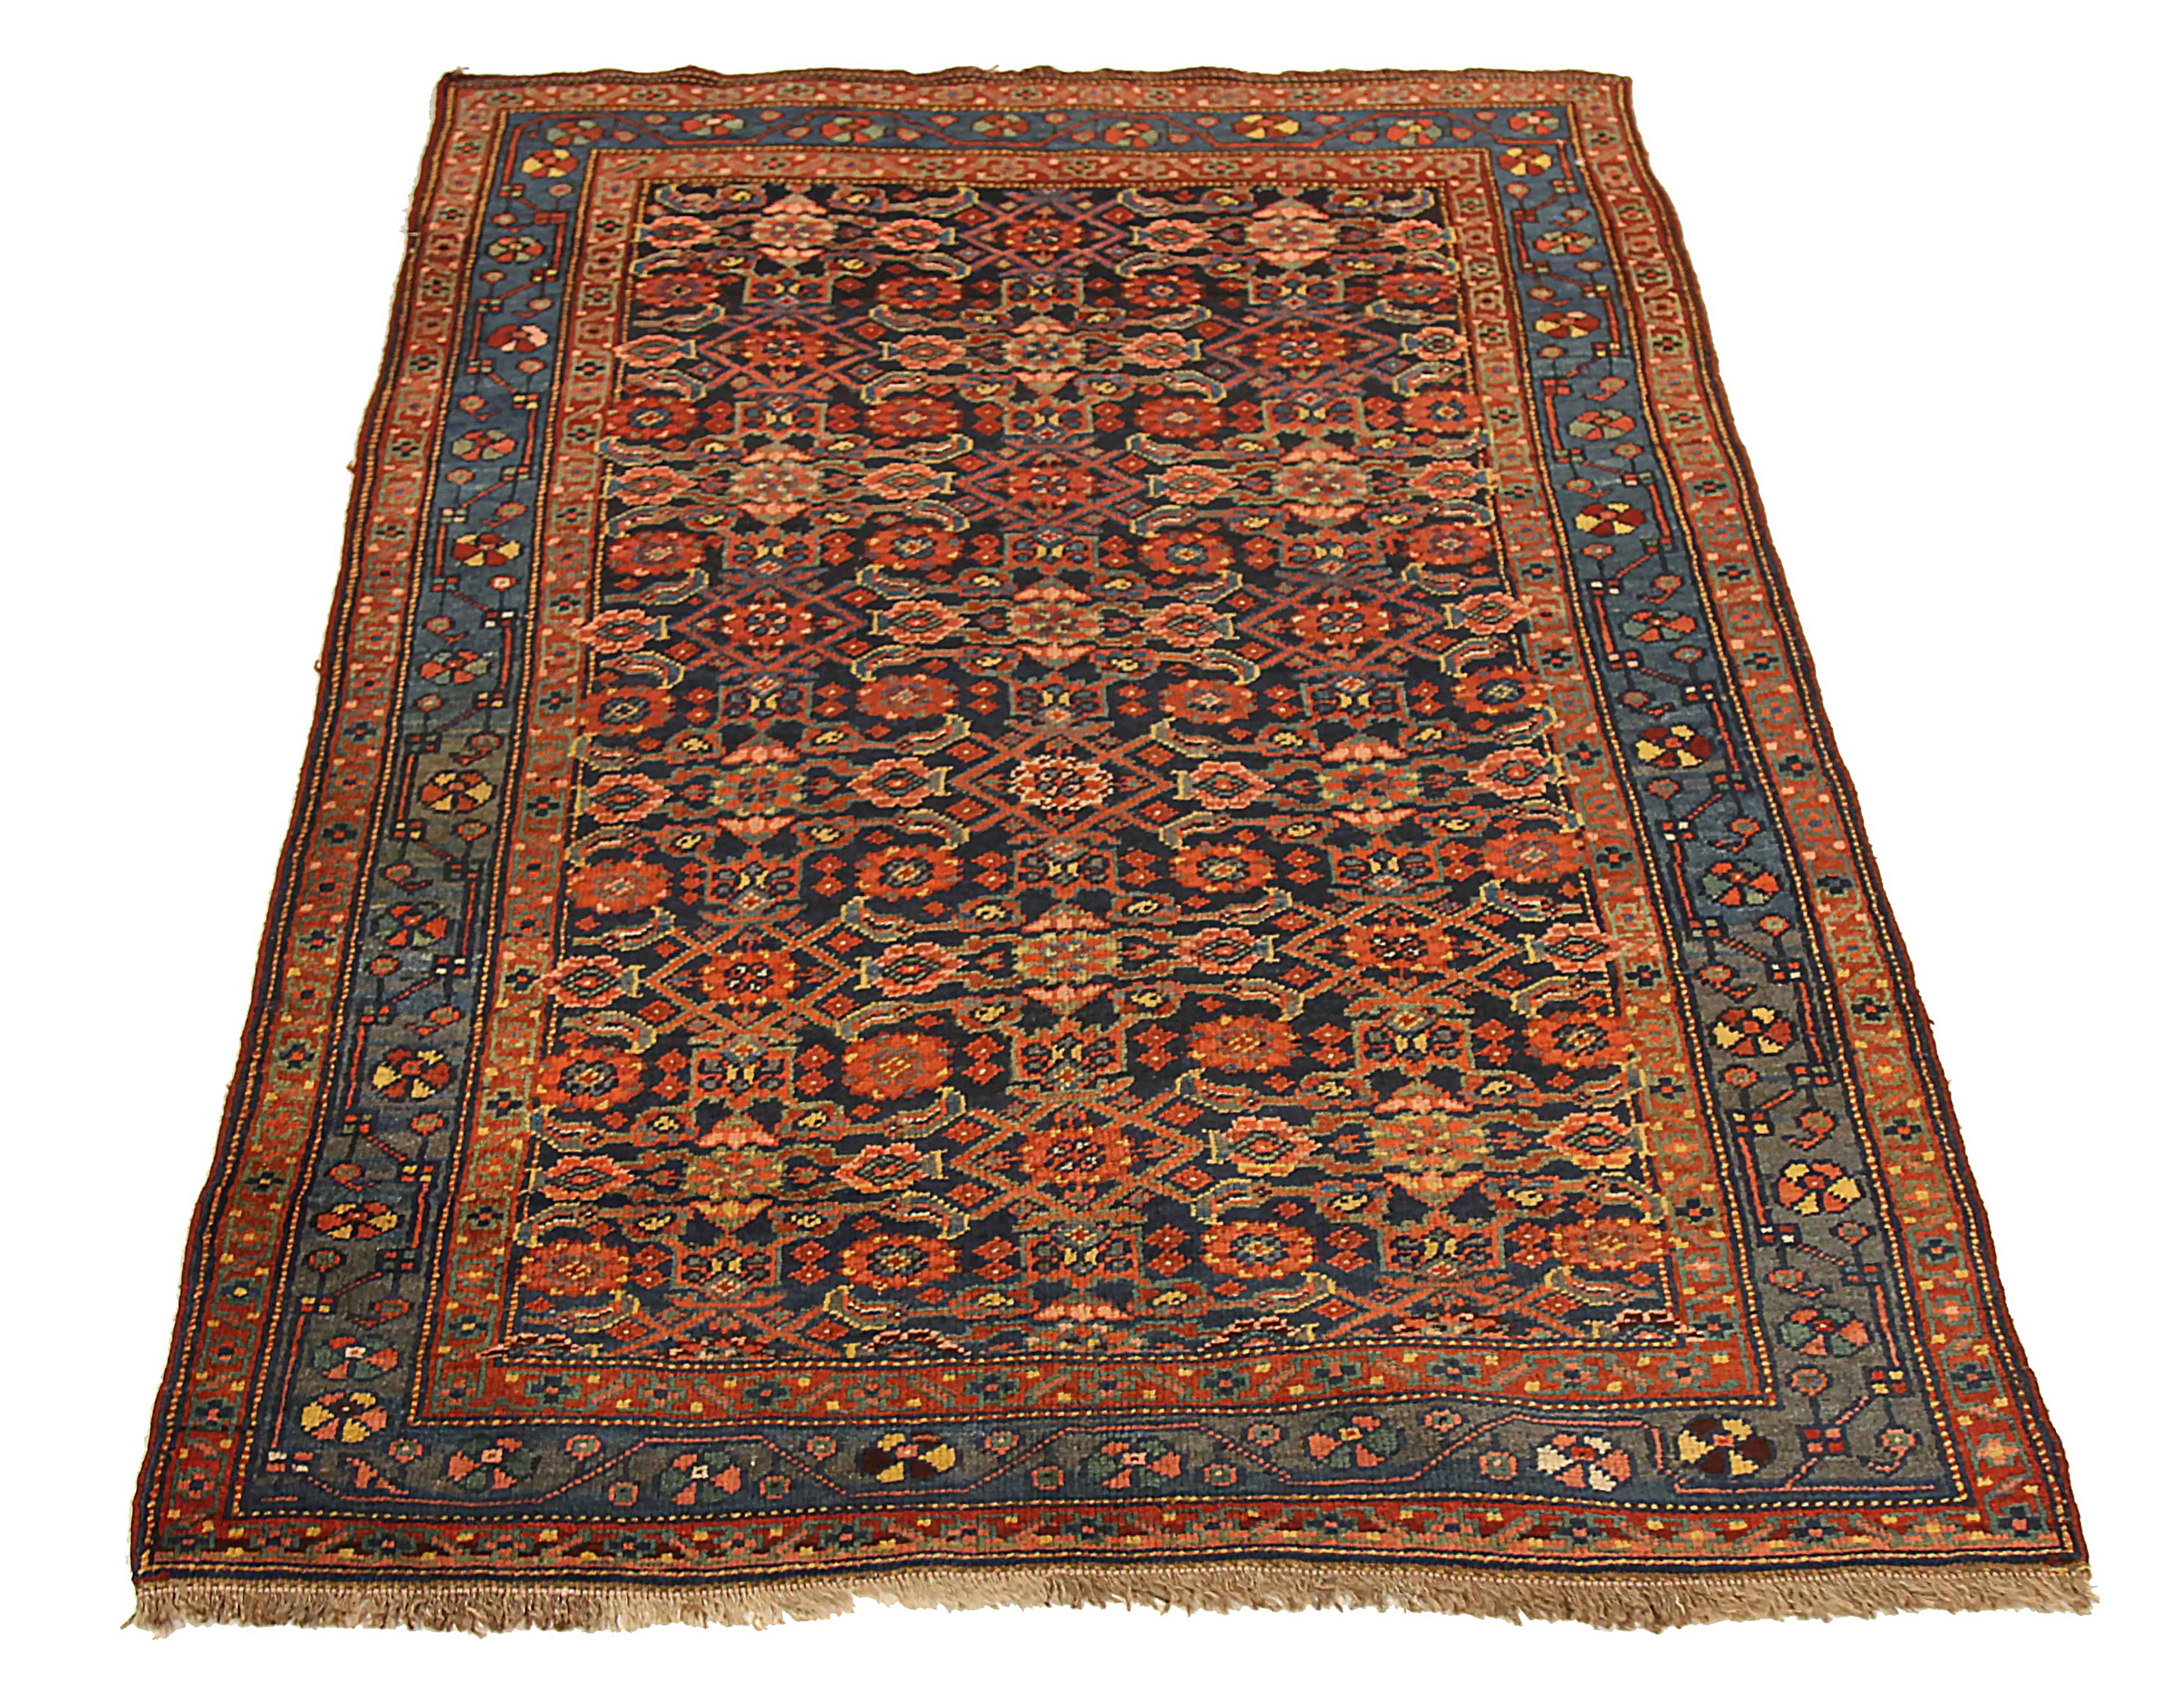 Antique Persian area rug handwoven from the finest sheep’s wool. It’s colored with all-natural vegetable dyes that are safe for humans and pets. It’s a traditional Art Deco design handwoven by expert artisans. It’s a lovely area rug that can be